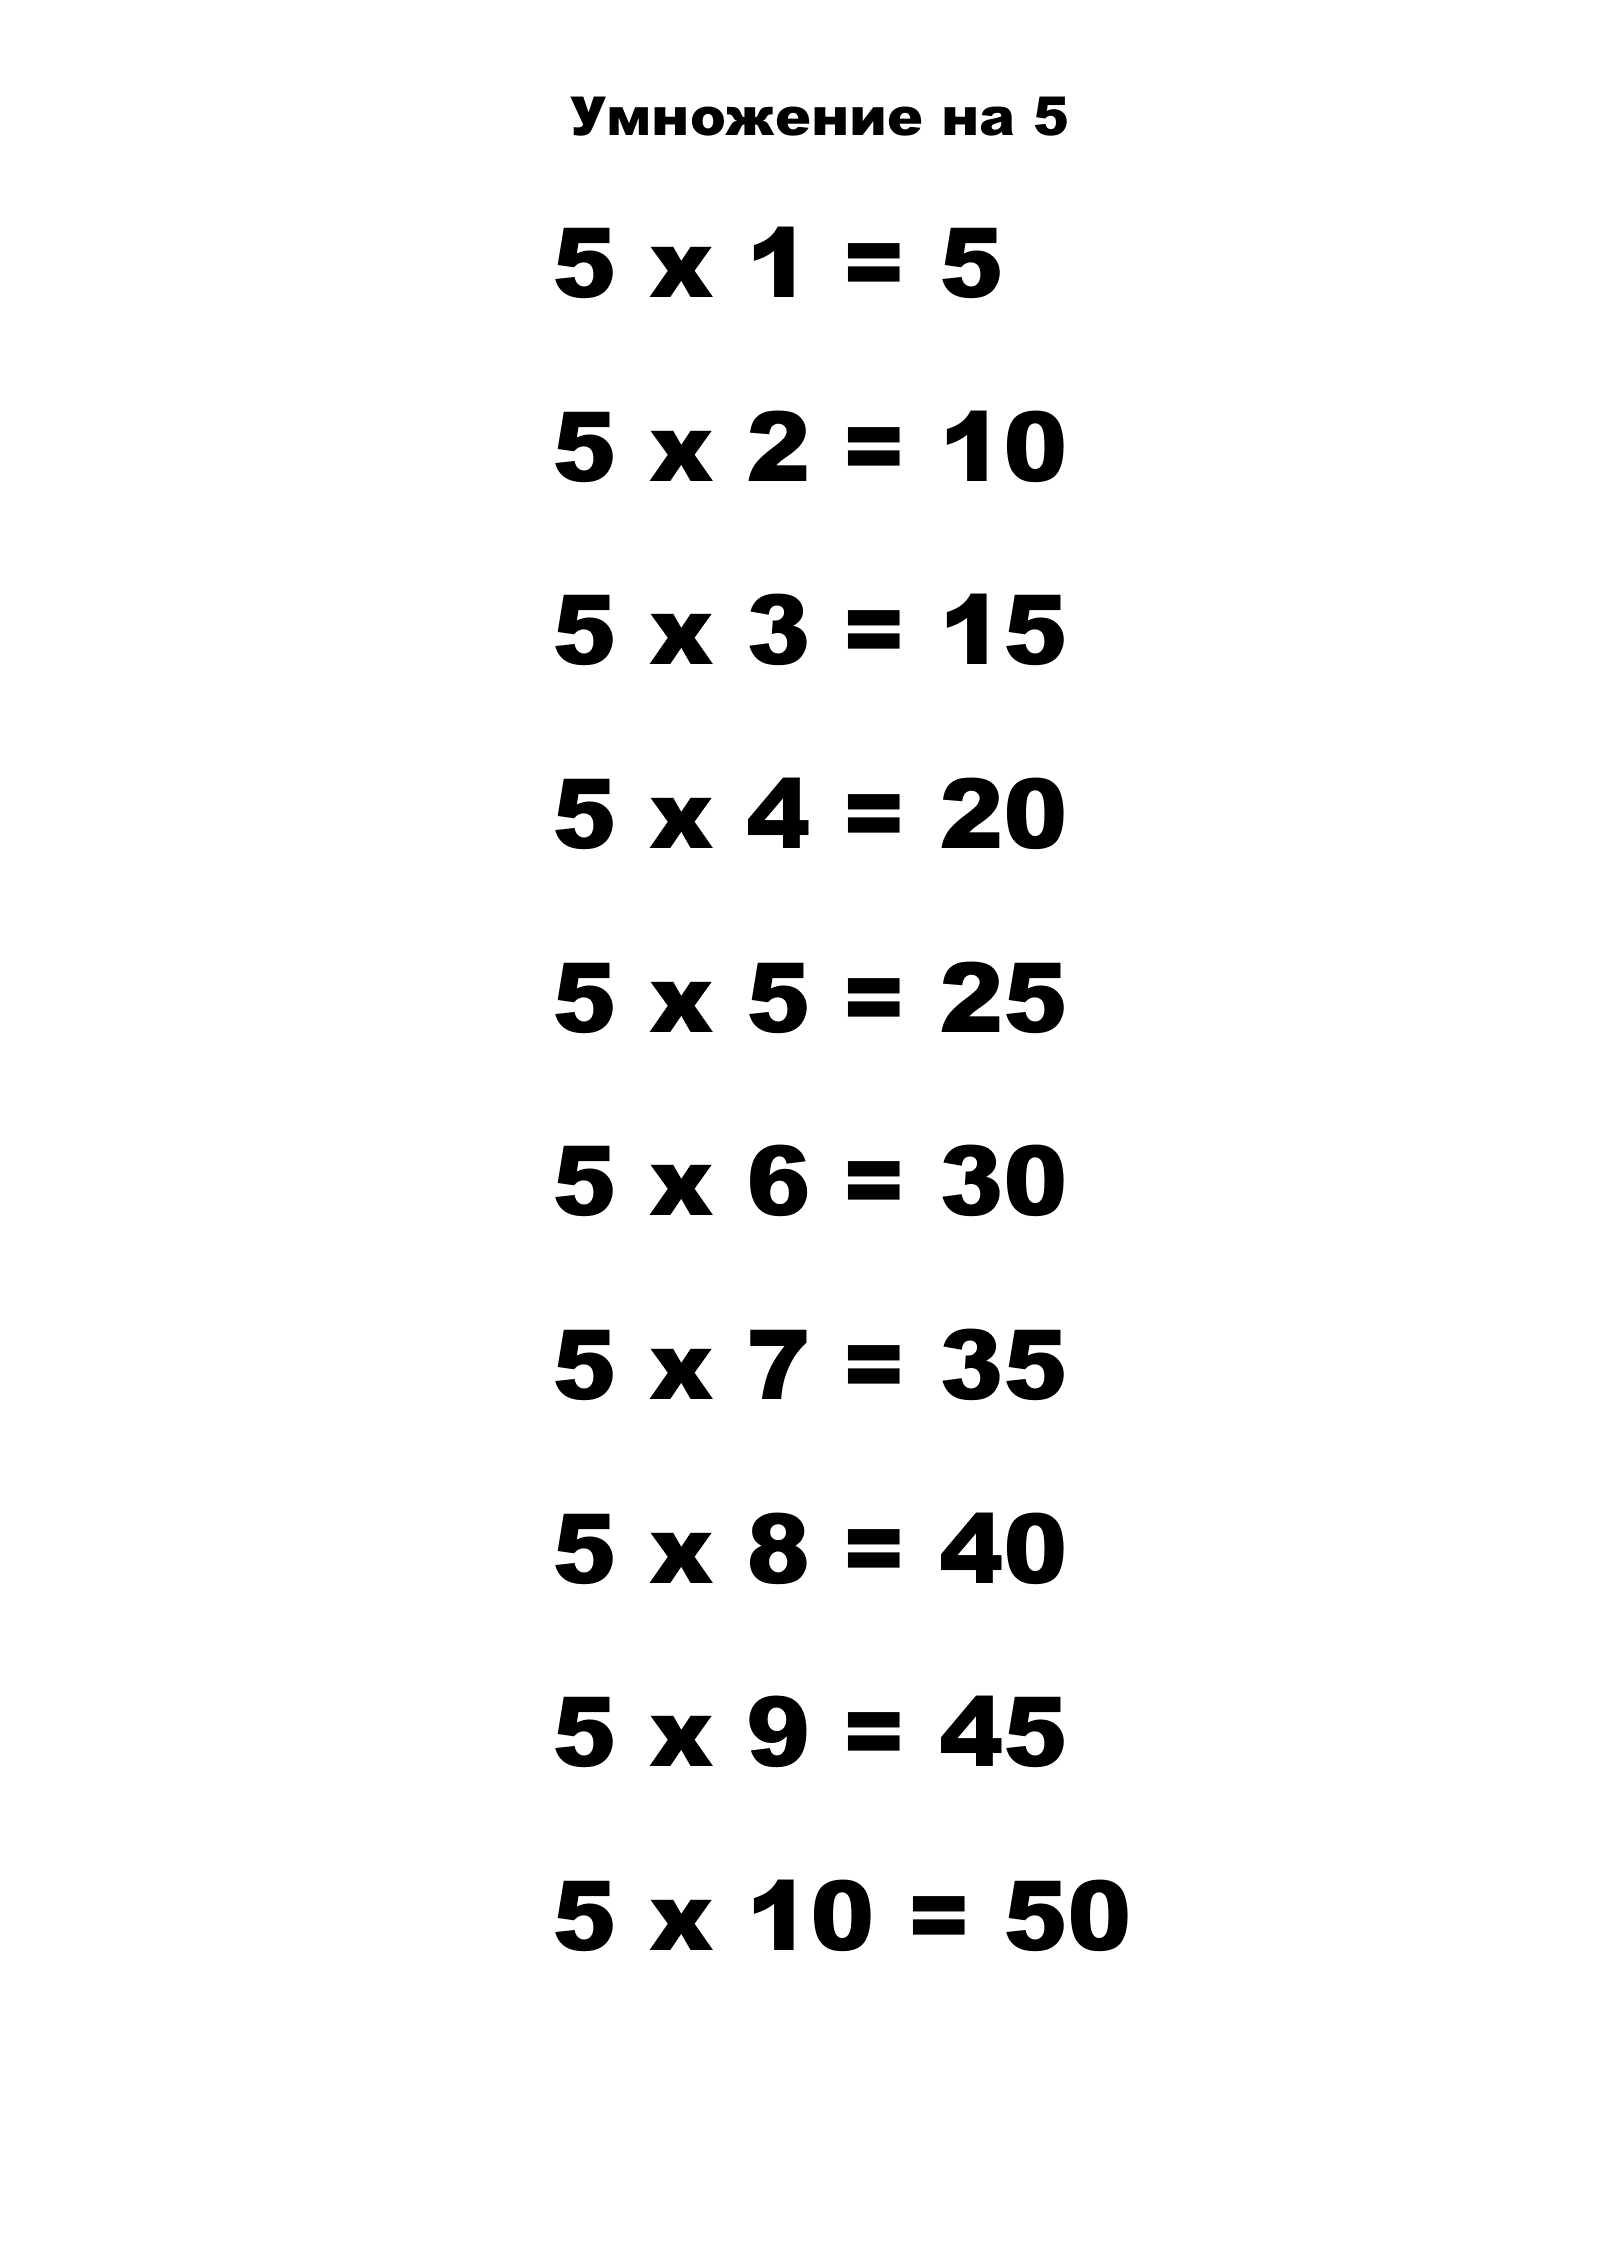 Multiplication Table for 5. Print